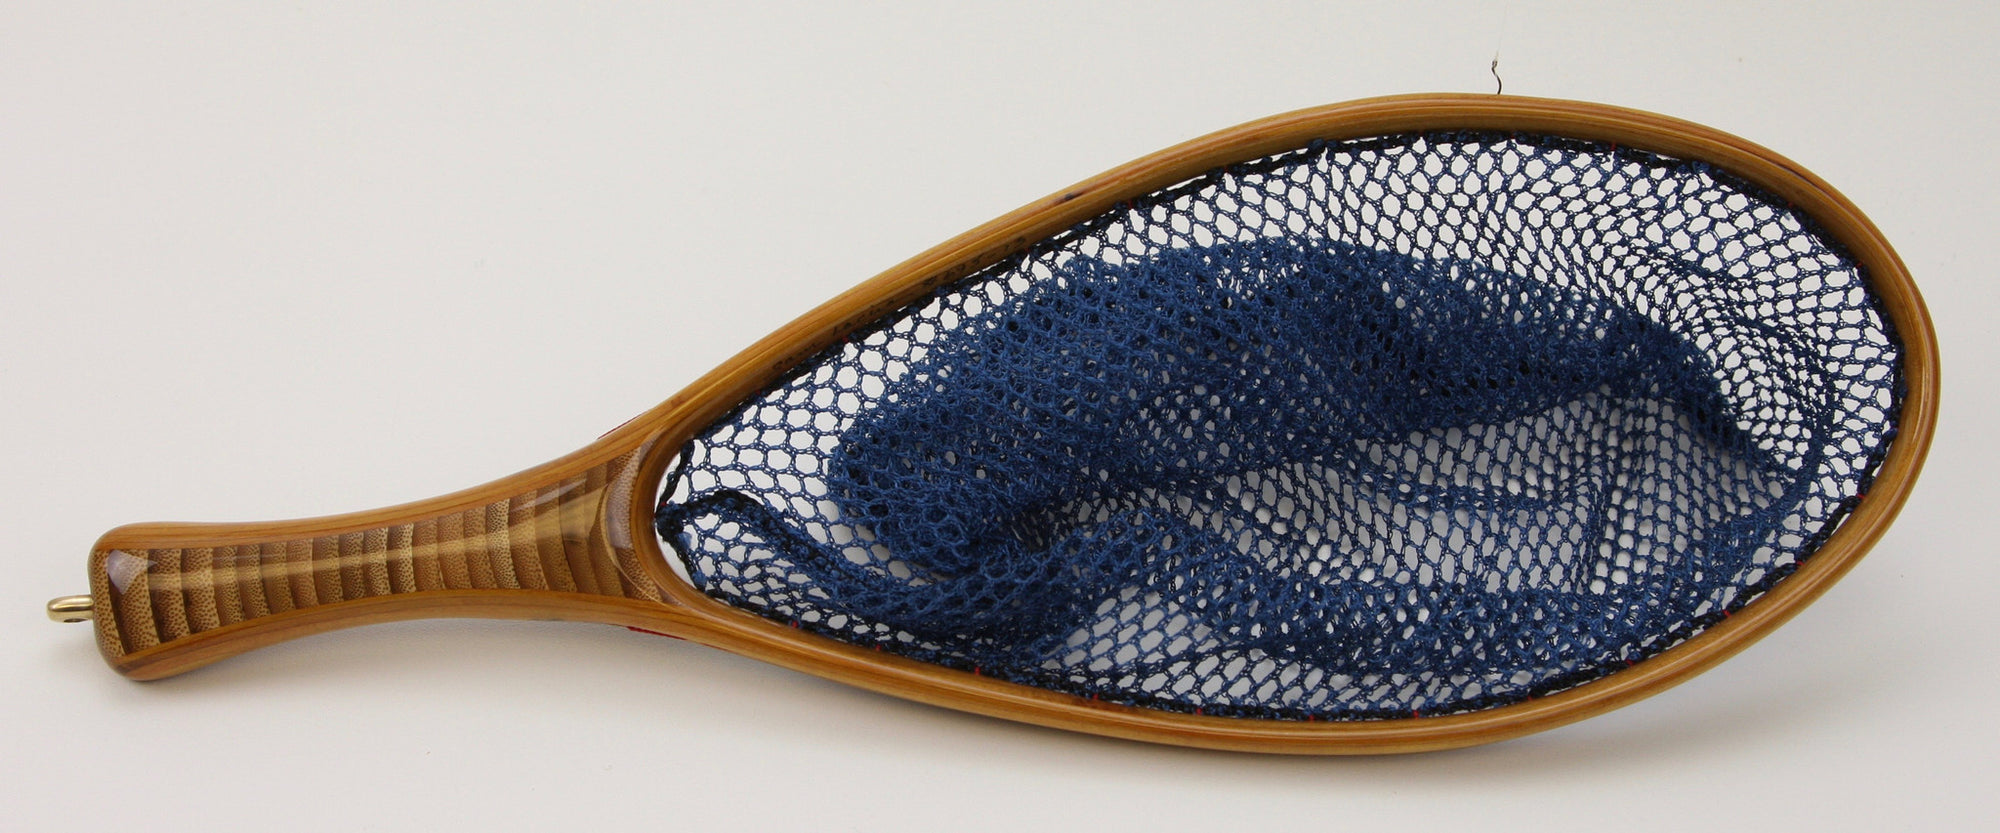 Small trout net with bamboo handle and blue net bag.